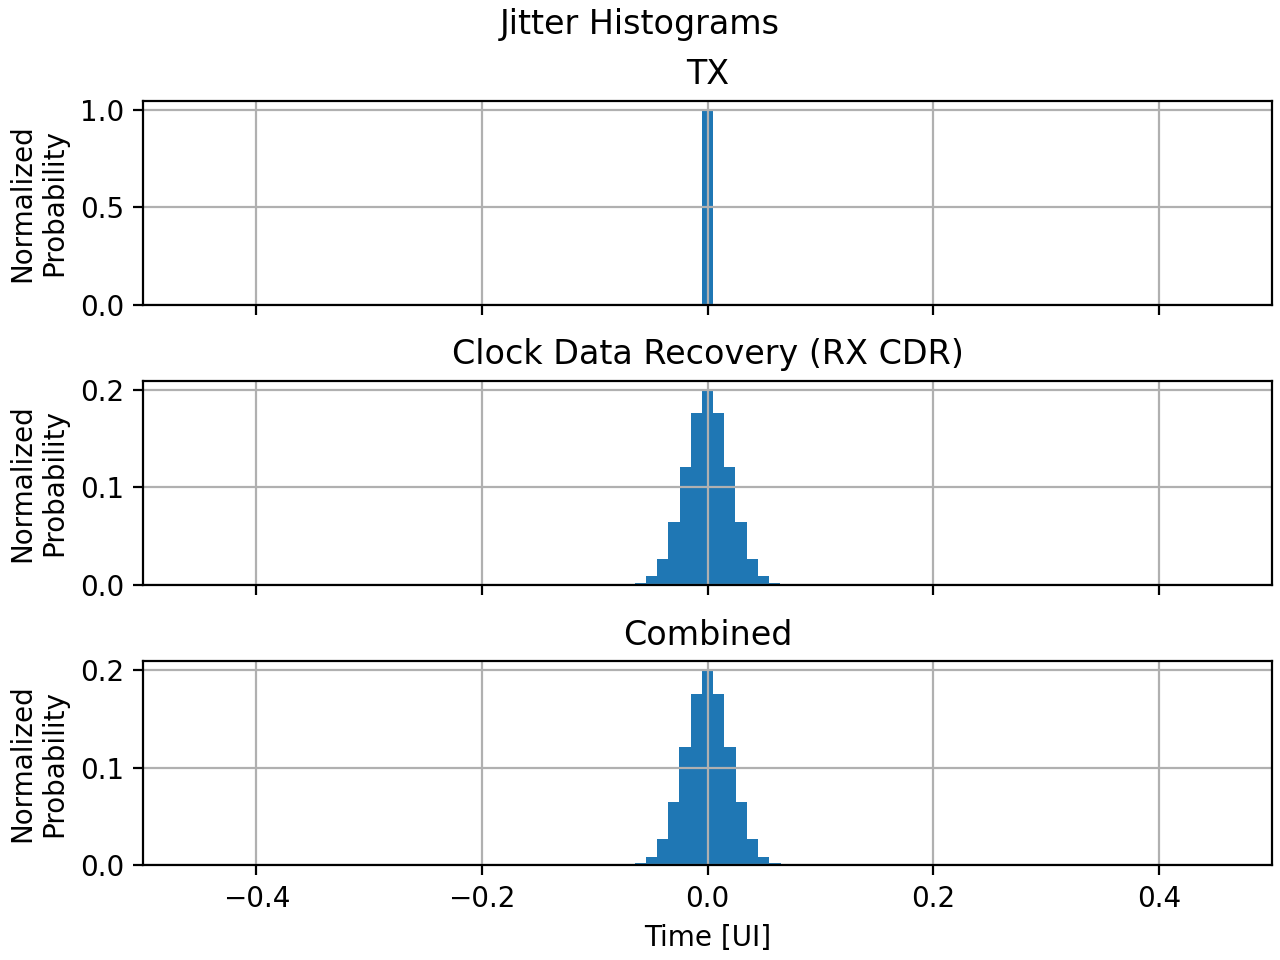 Jitter summary, one of the distribution plots